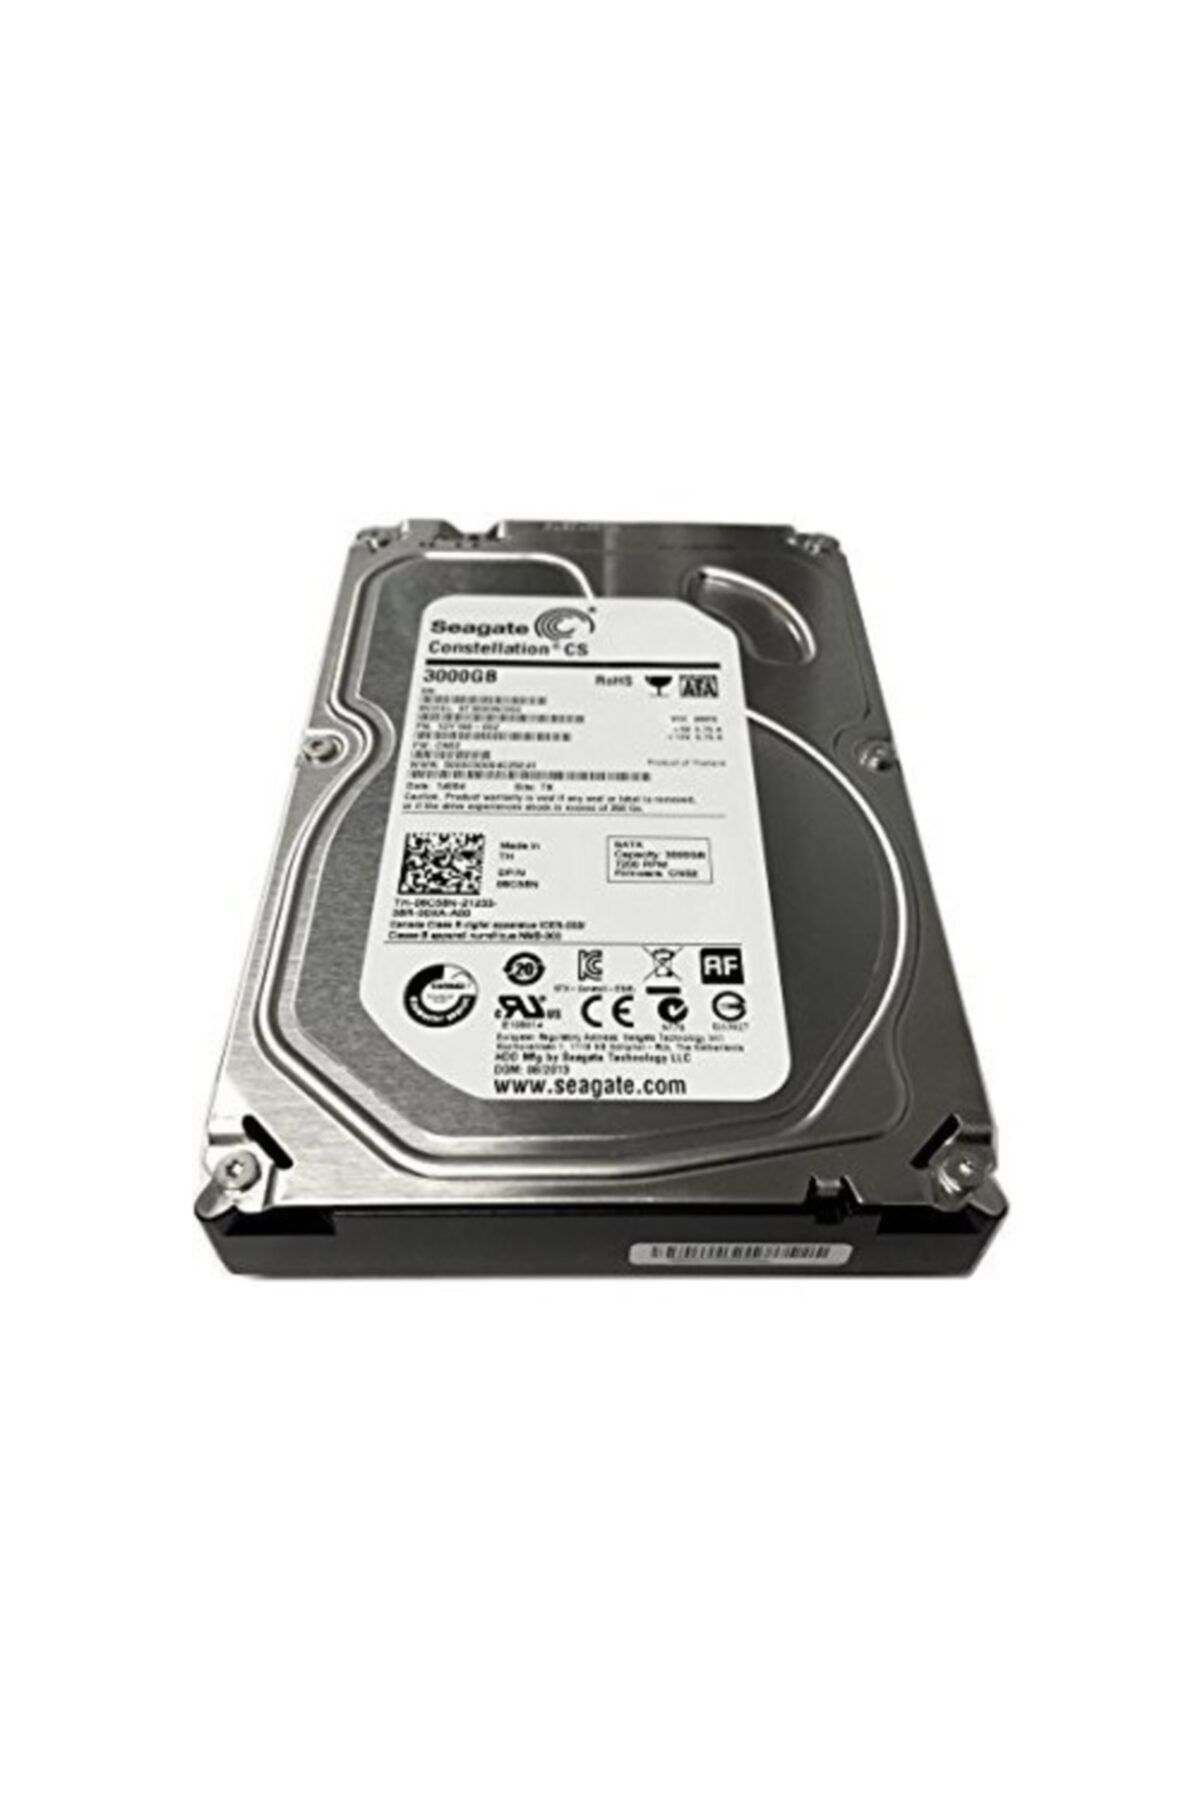 Seagate 3tb Hdd St3300651ns 7200 Rpm 64mb Harddisk